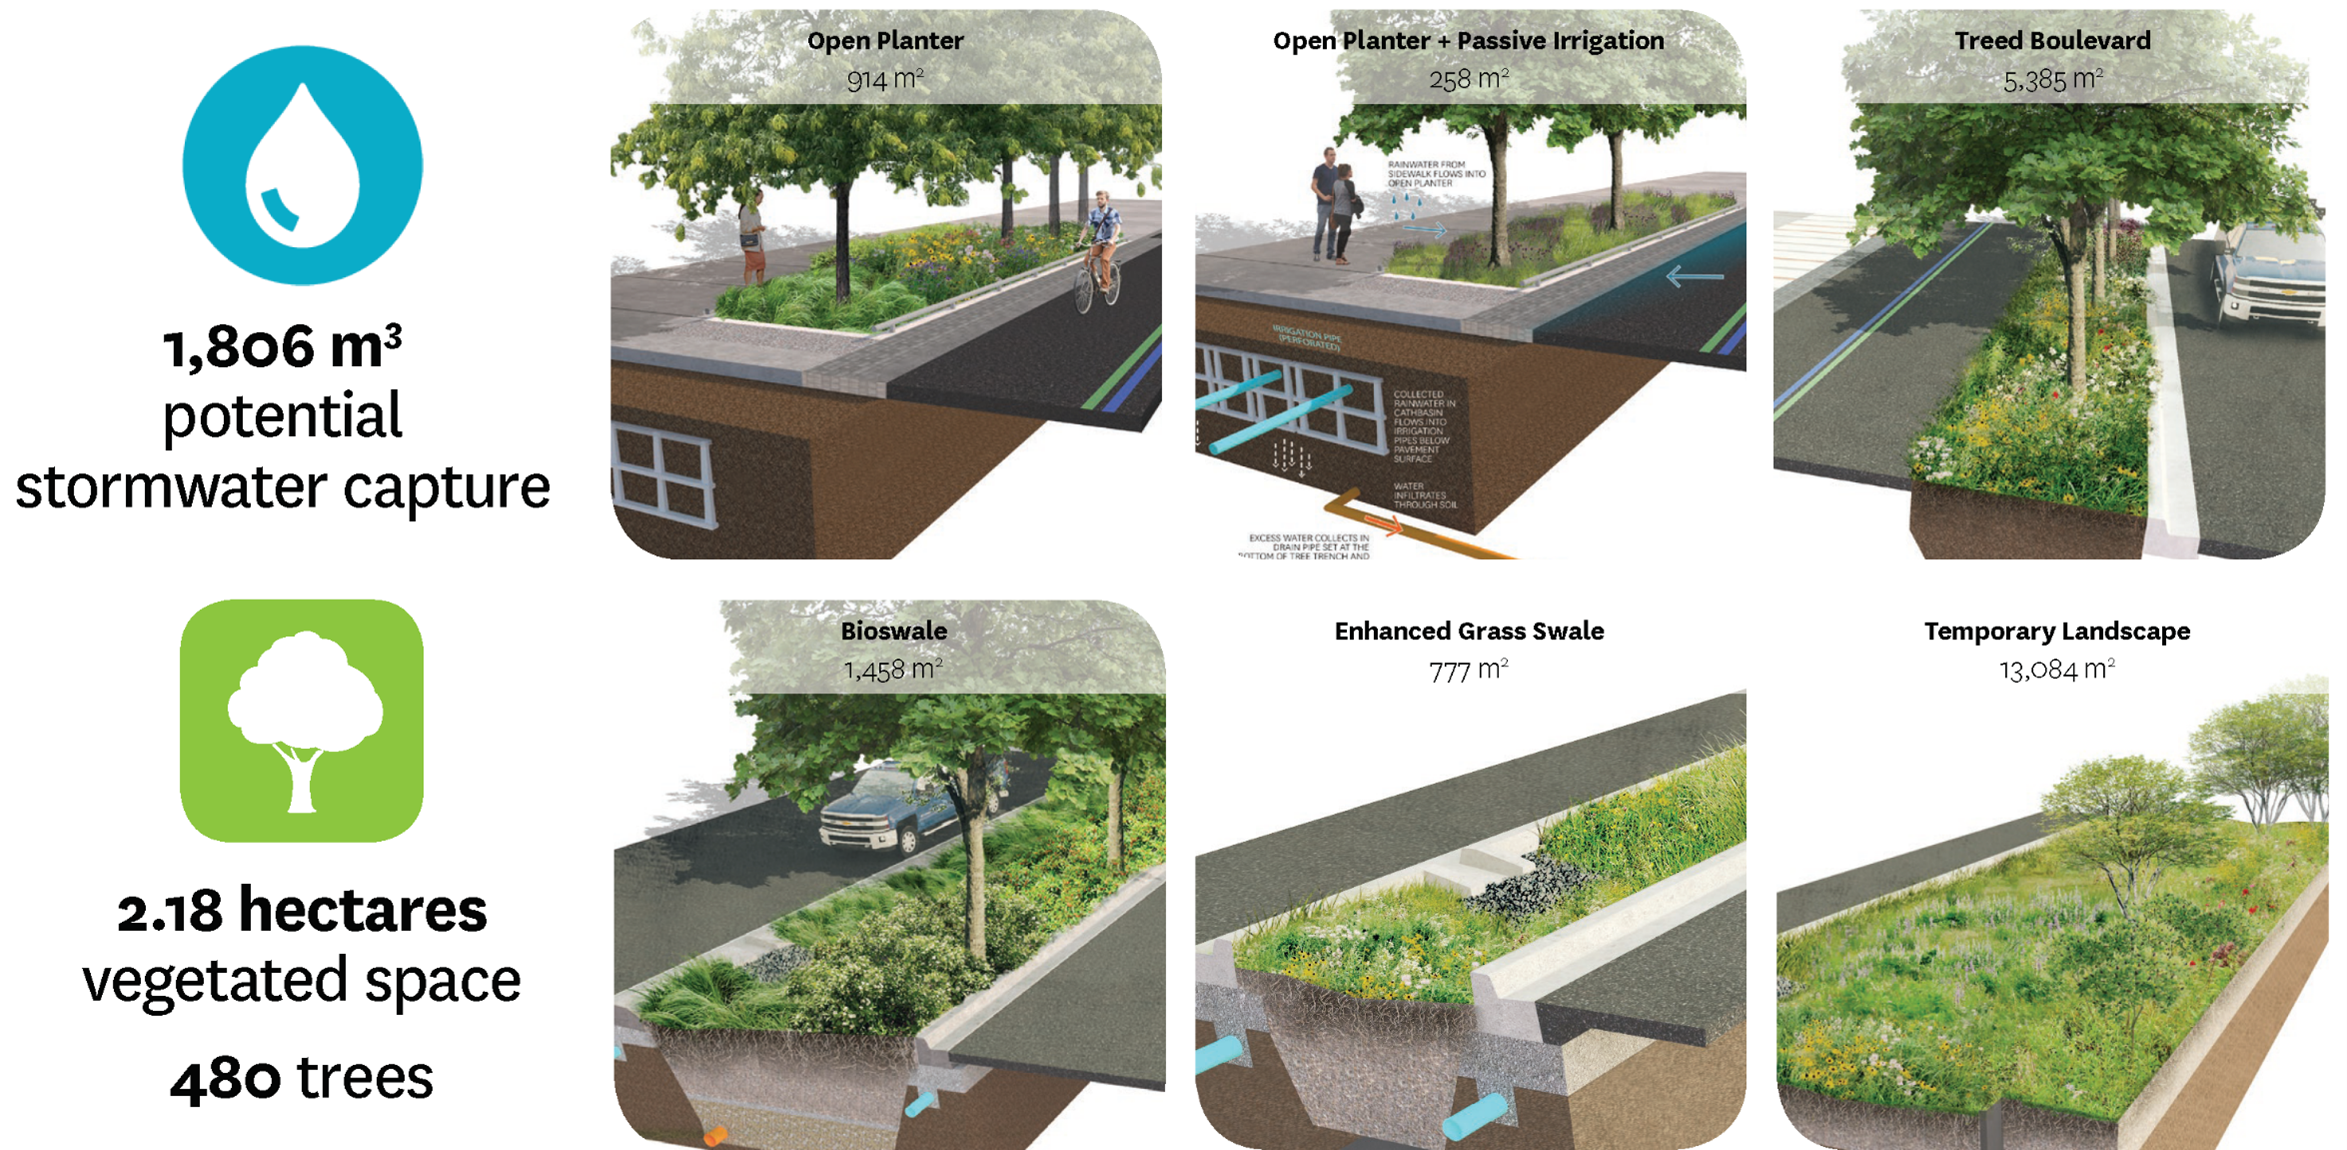 Over two hectares of vegetated landscape in the new streets could capture over 1 million litres of stormwater in a month